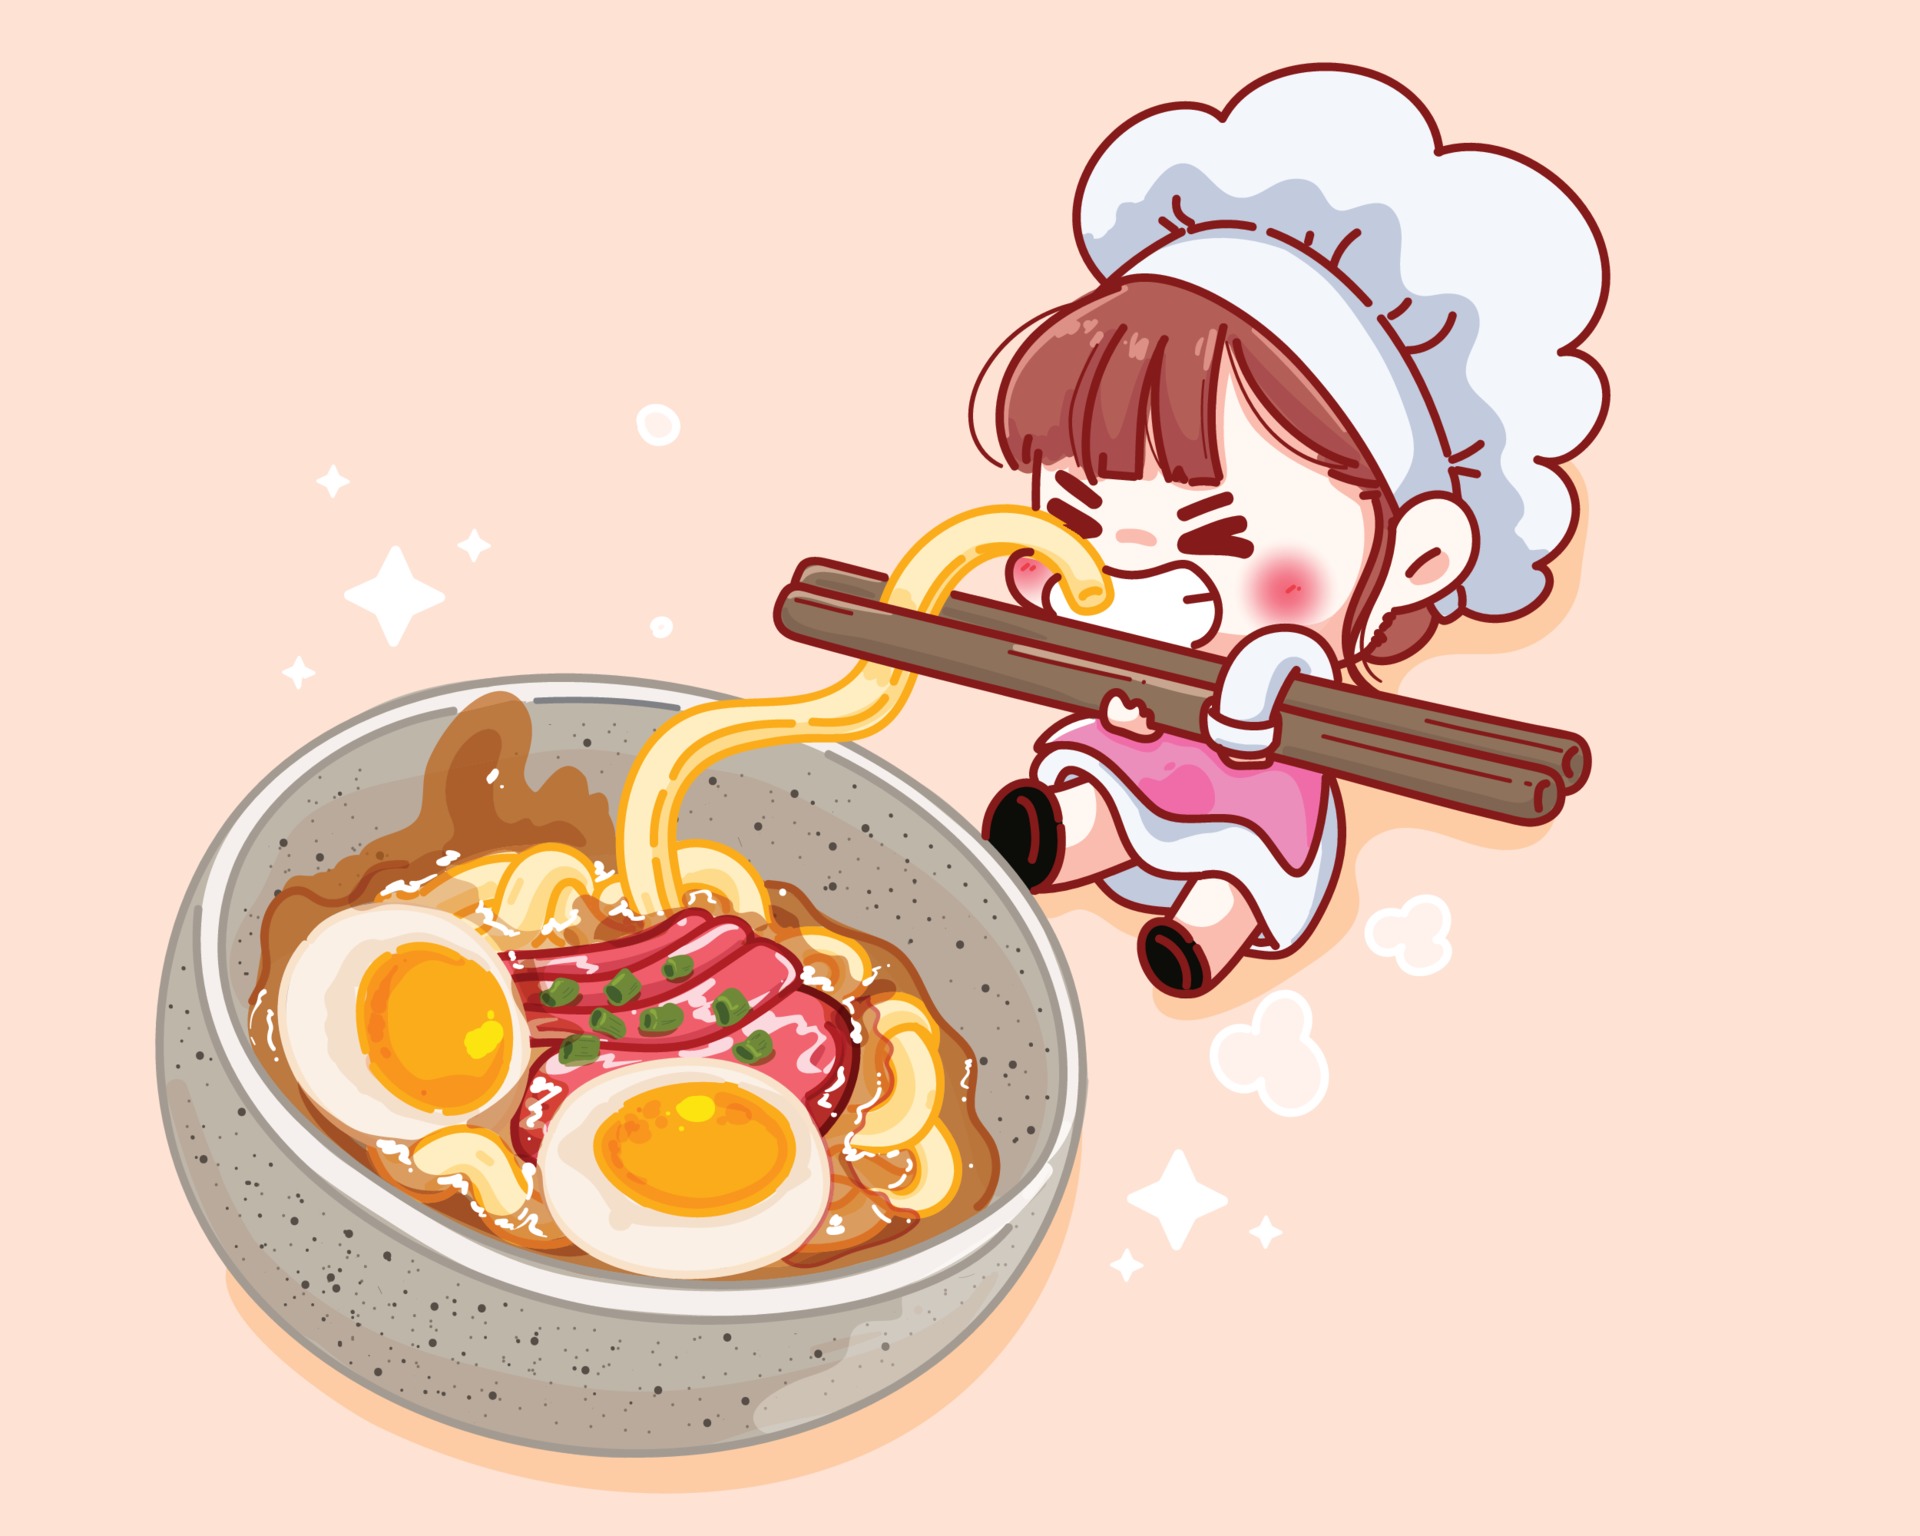 https://static.vecteezy.com/system/resources/previews/001/936/349/original/cute-chef-holding-chopsticks-with-noodles-near-the-soup-cartoon-illustration-vector.jpg